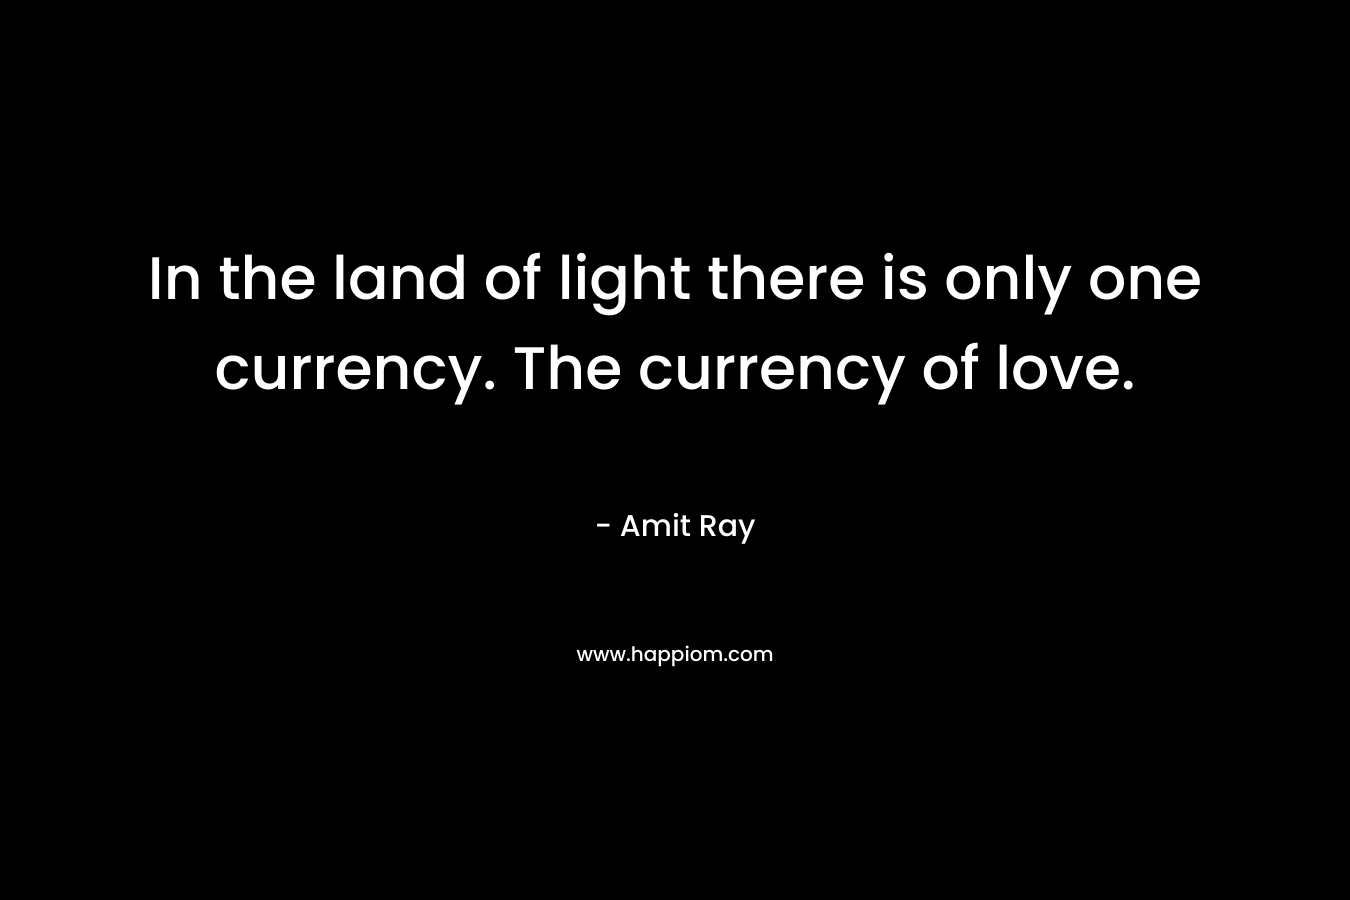 In the land of light there is only one currency. The currency of love.